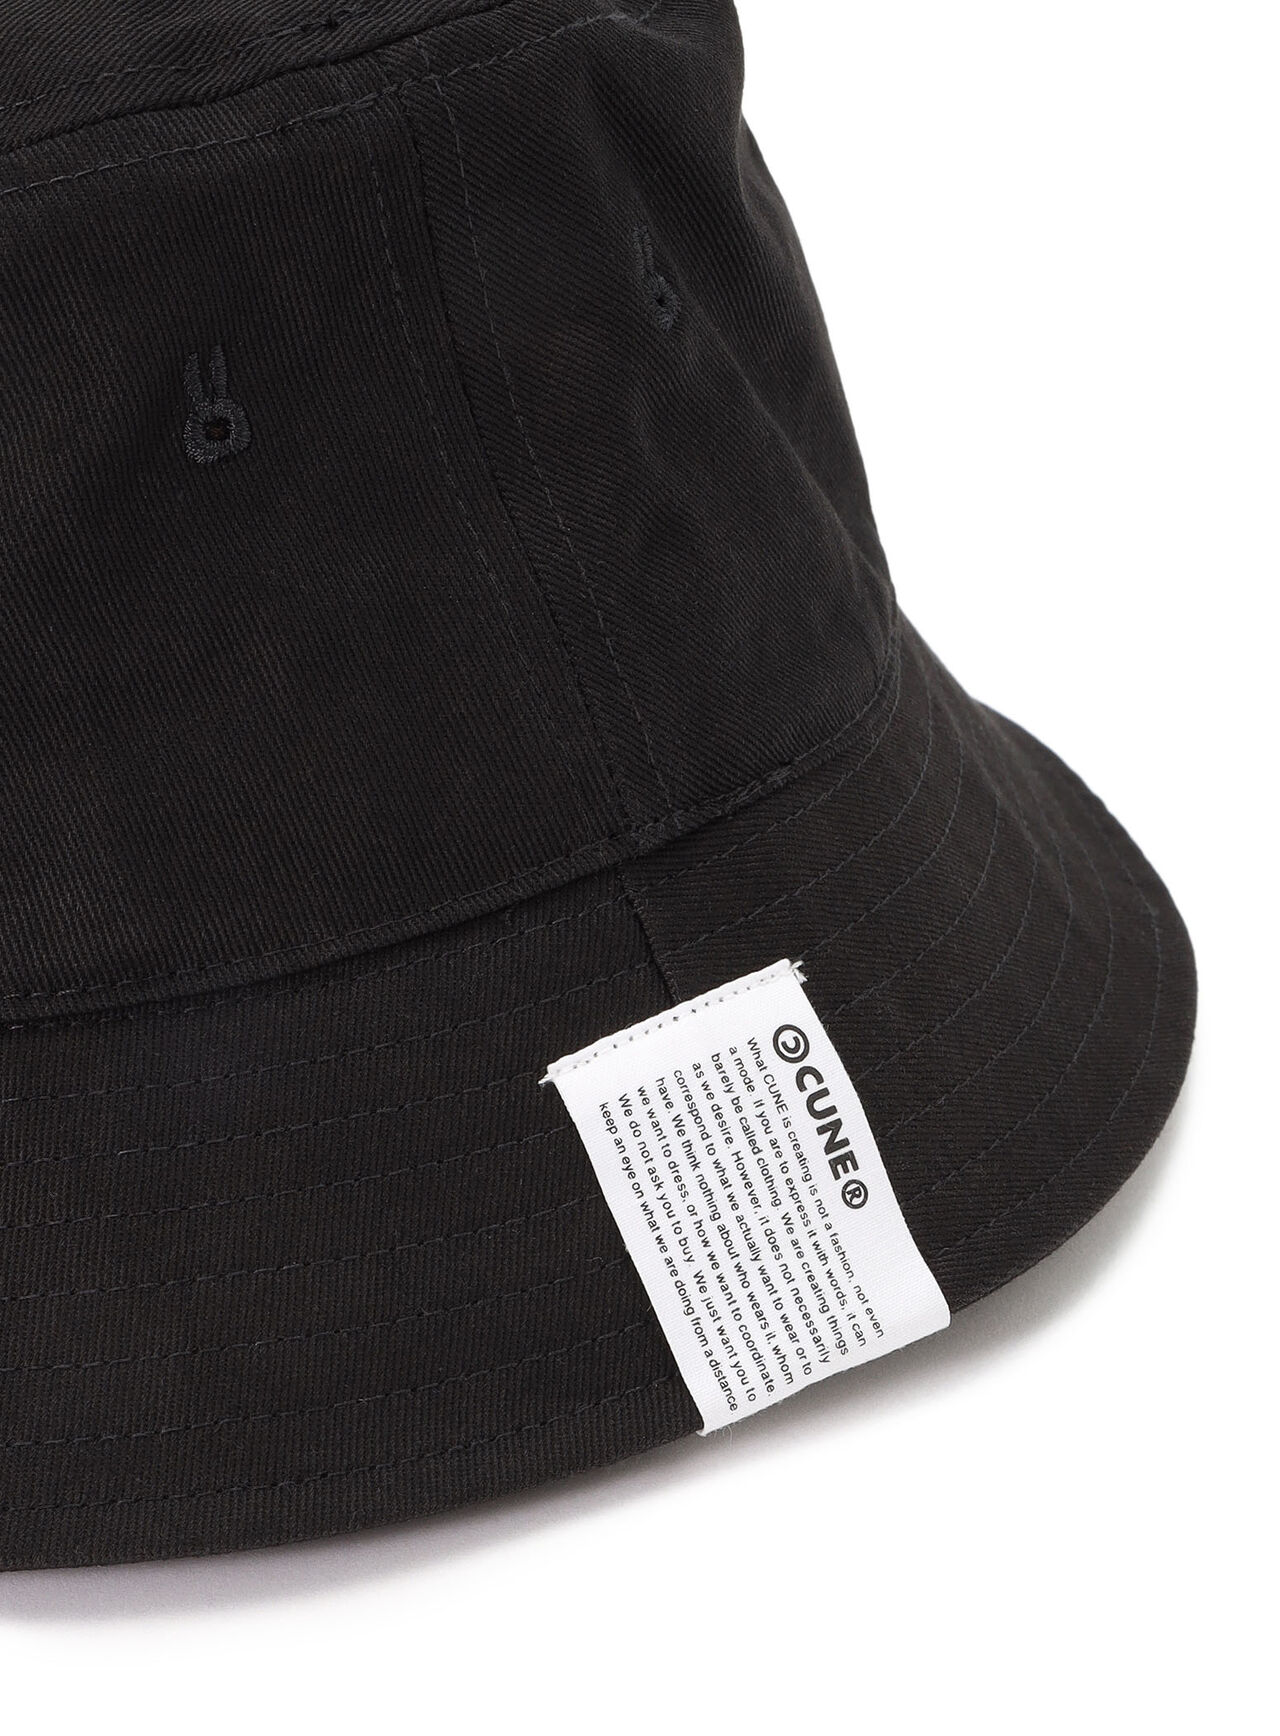 Embroidered Bucket Hat Shake,ONE, large image number 3